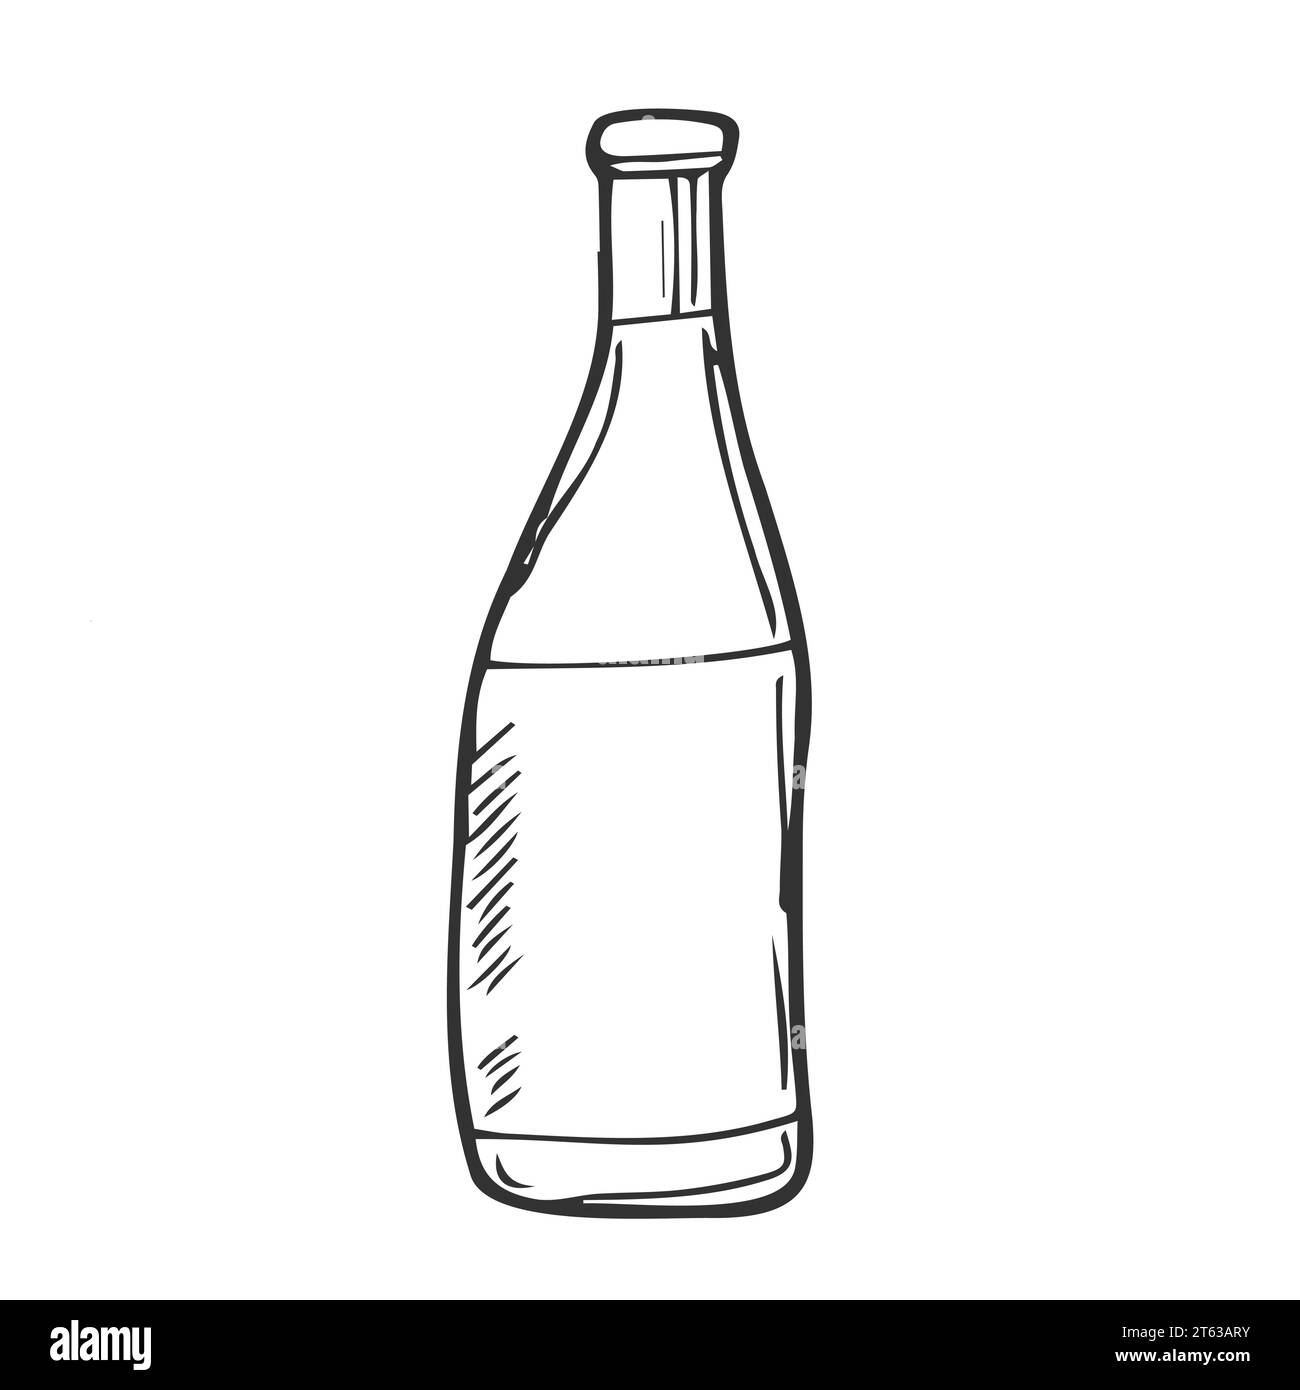 bottle, sketch style vector illustration isolated on white background. glass bottle, container Stock Vector